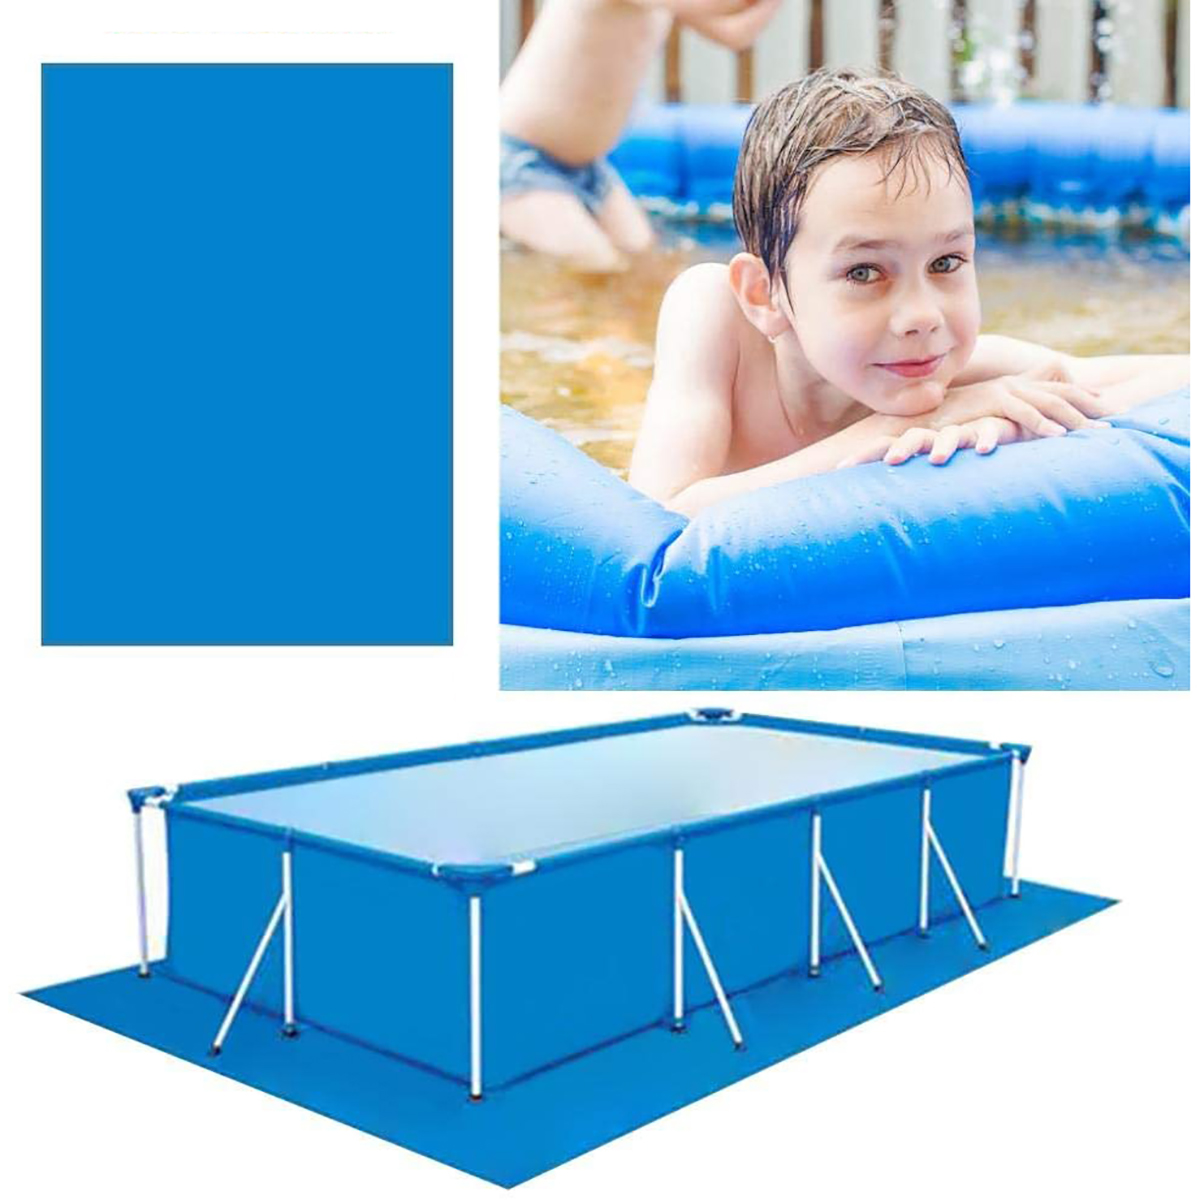 Swimming-Pool-Square-Ground-Cloth-Cover-Dustproof-Waterproof-Anti-ultraviolet-Outdoor-Protection-Flo-1956594-3